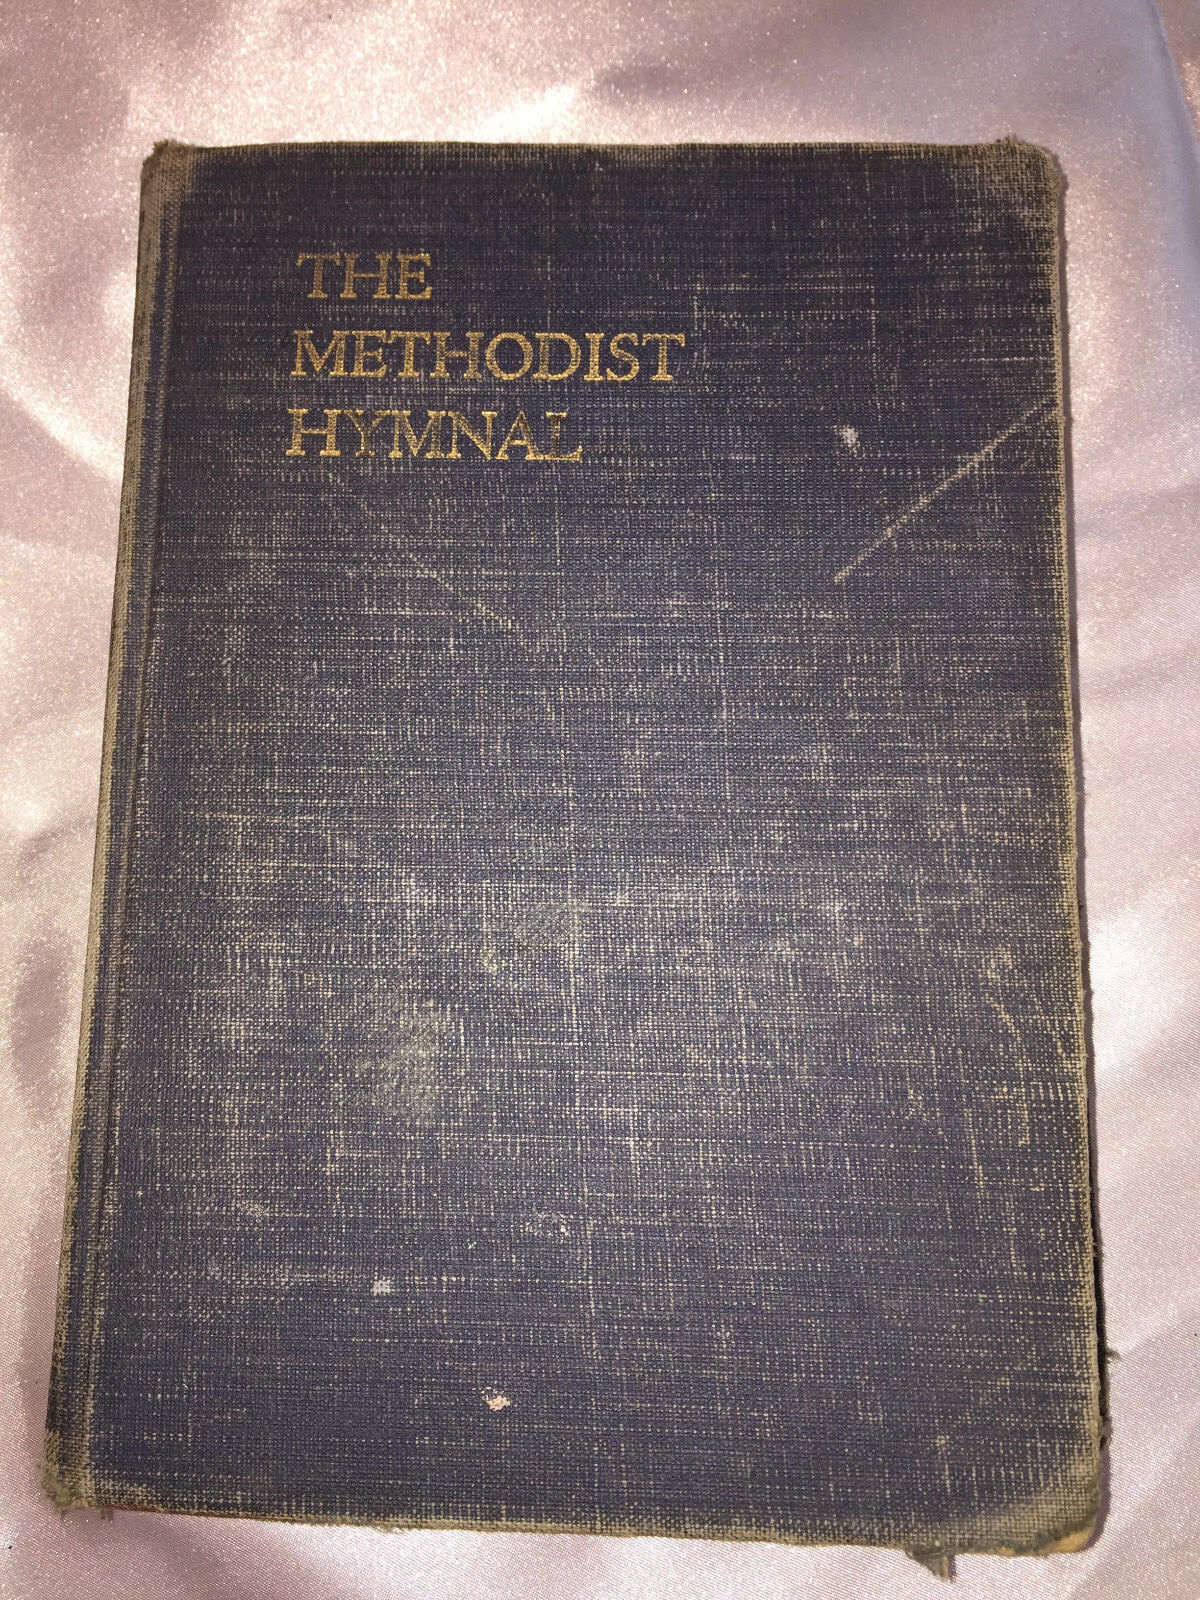 The Methodist Hymnal Black Hard Cover Religious Song Chorus Book